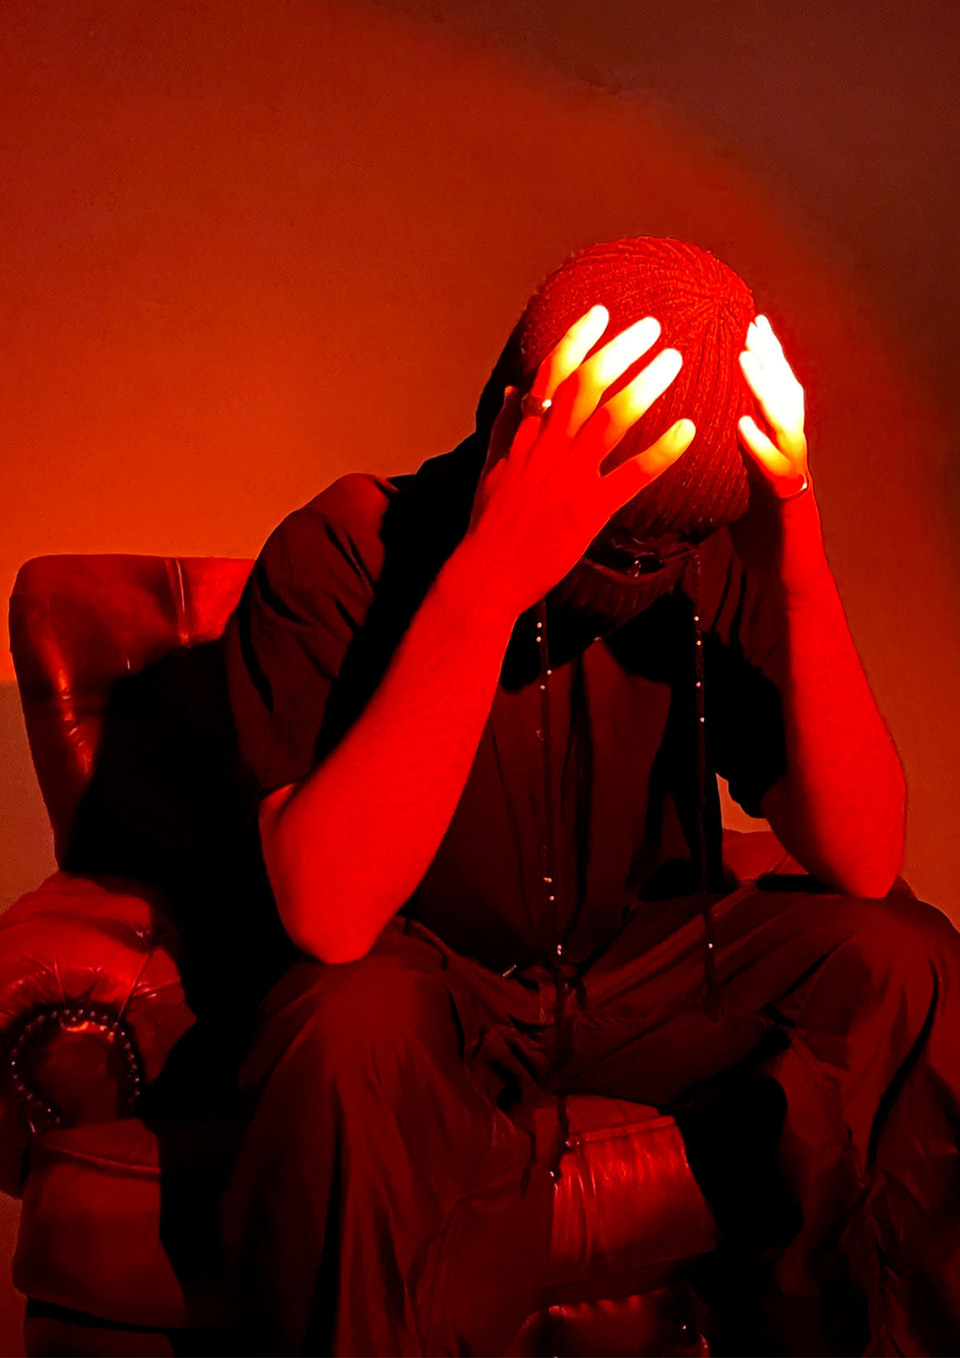 A man seated, holding his balaclava-clad head in his hands is bathed in a red light